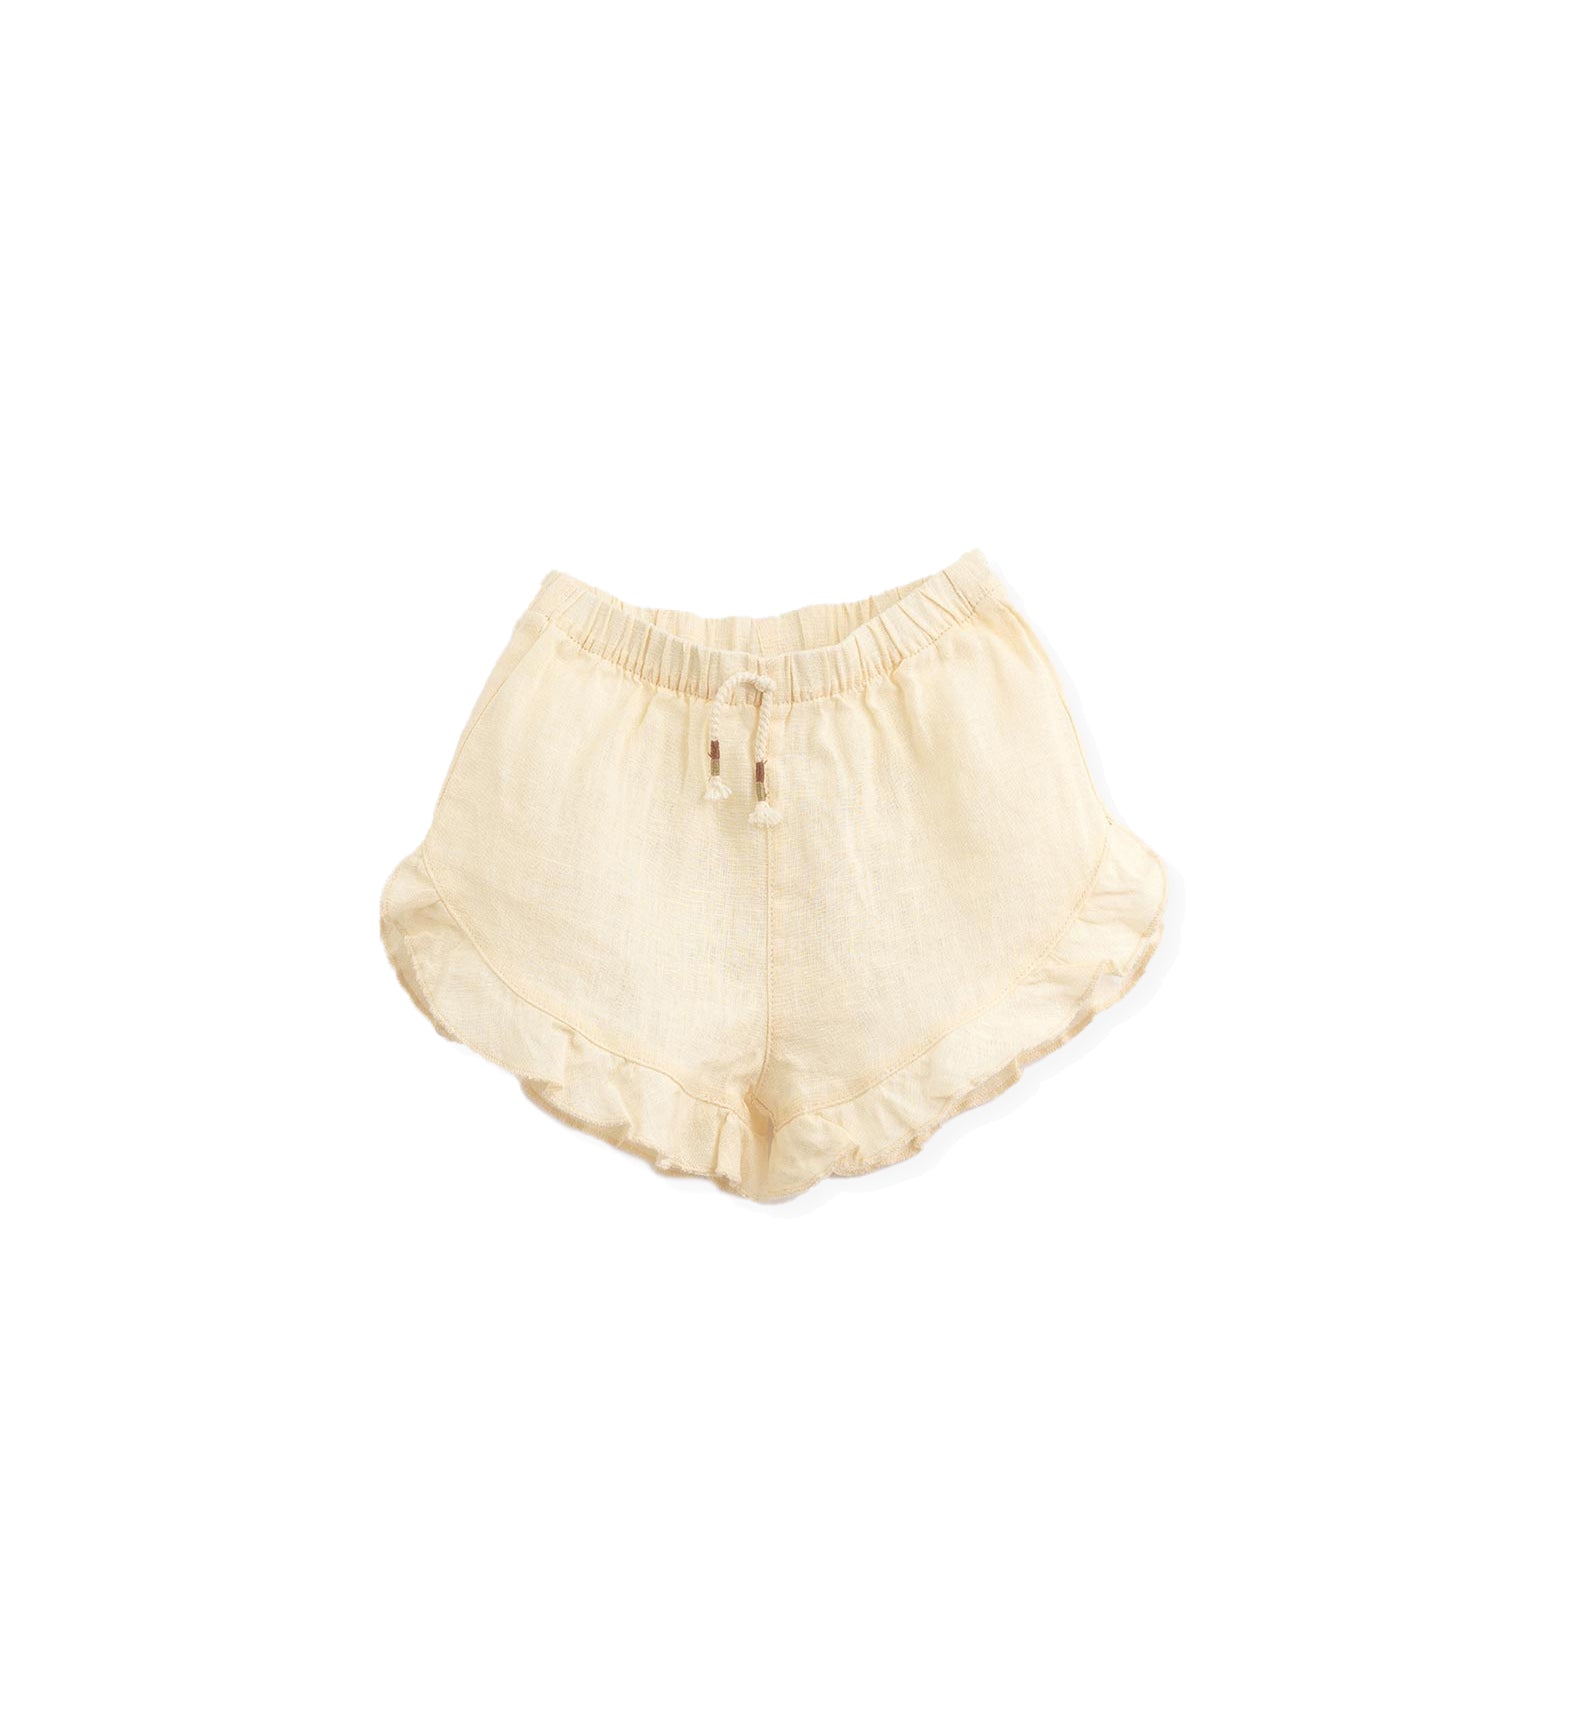 Play up linen shorts in karite cream color